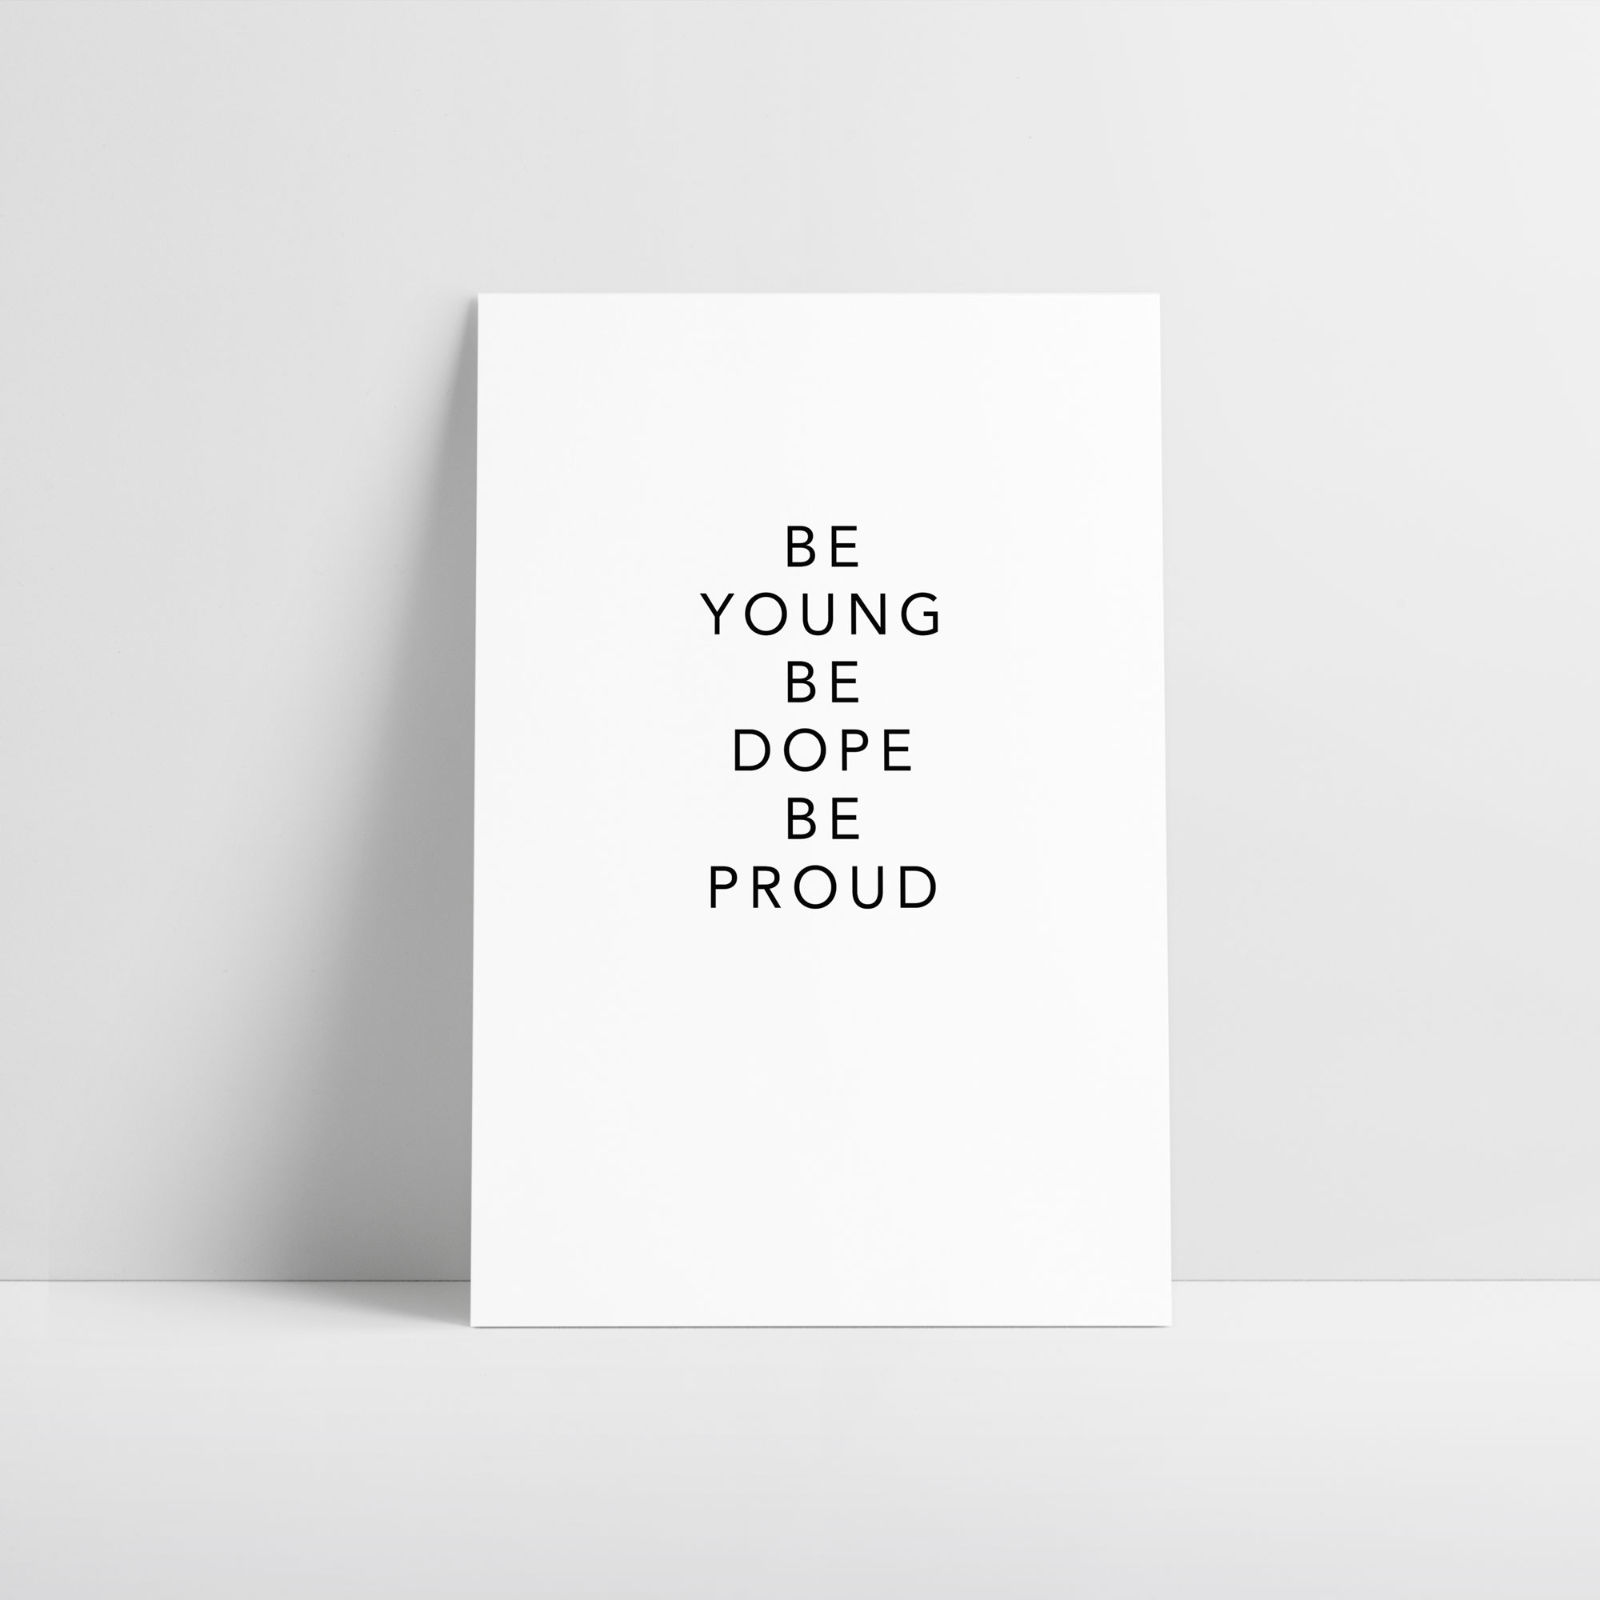 Young, dope and proud - typography Design Art Poster Wall Art Prints Interior Decoration